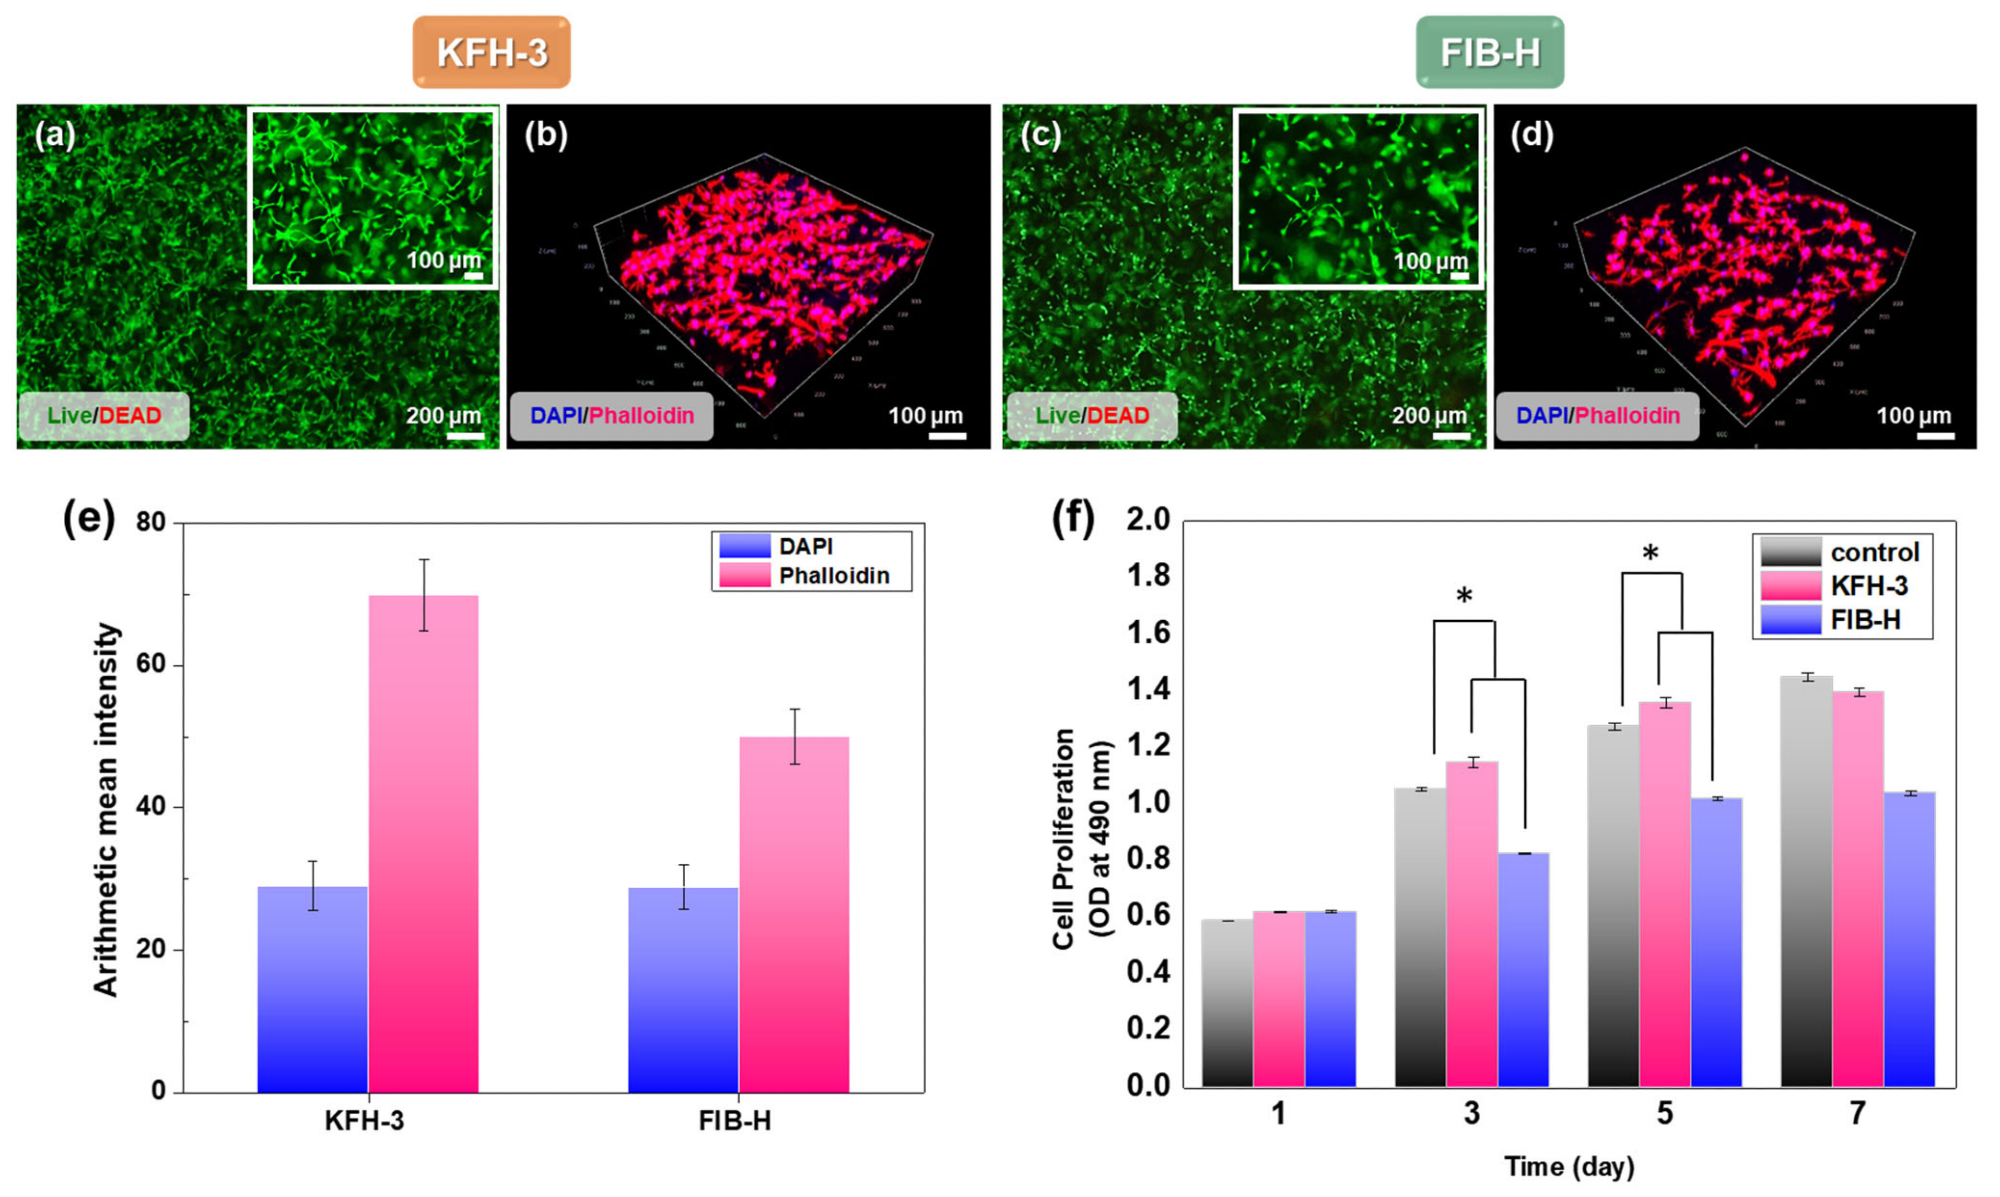 Characterization of cell adhesion and proliferation in three-dimensional cell encapsulation in FIB-H and KFH-3. For the cell viability assay, human gingiva fibroblasts (HGFs) embedded in FIB-H and KFH-3 were stained with calce-in_Am (green)/ethidium homodimer (red). LIVE/DEAD assay 24 h after encapsulation (a,c) shown at low (scale bar = 200 µm) and high (scale bar = 100 µm) magnification. (b,d) Confocal pictures of encapsulated HGF cells labeled with 2-(4-aminophenyl)-1H-indole-6-carboxamidine (DAPI) and Phalloidin (F-actin) (scale bar = 100 µm). (e) Expression of DAPI and phalloidin was quantified by immunofluorescence after 3 days in culture. (f) The proliferation of HGF cells encapsulated in KFH-3 and FIB-H for 7 days, as measured in a CCK-8 assay. Both data were evaluated for cyto-compatibility at a concentration of 20 mg/mL. Data are presented as the mean ± SD of triplicate experiments: * p < 0.05.